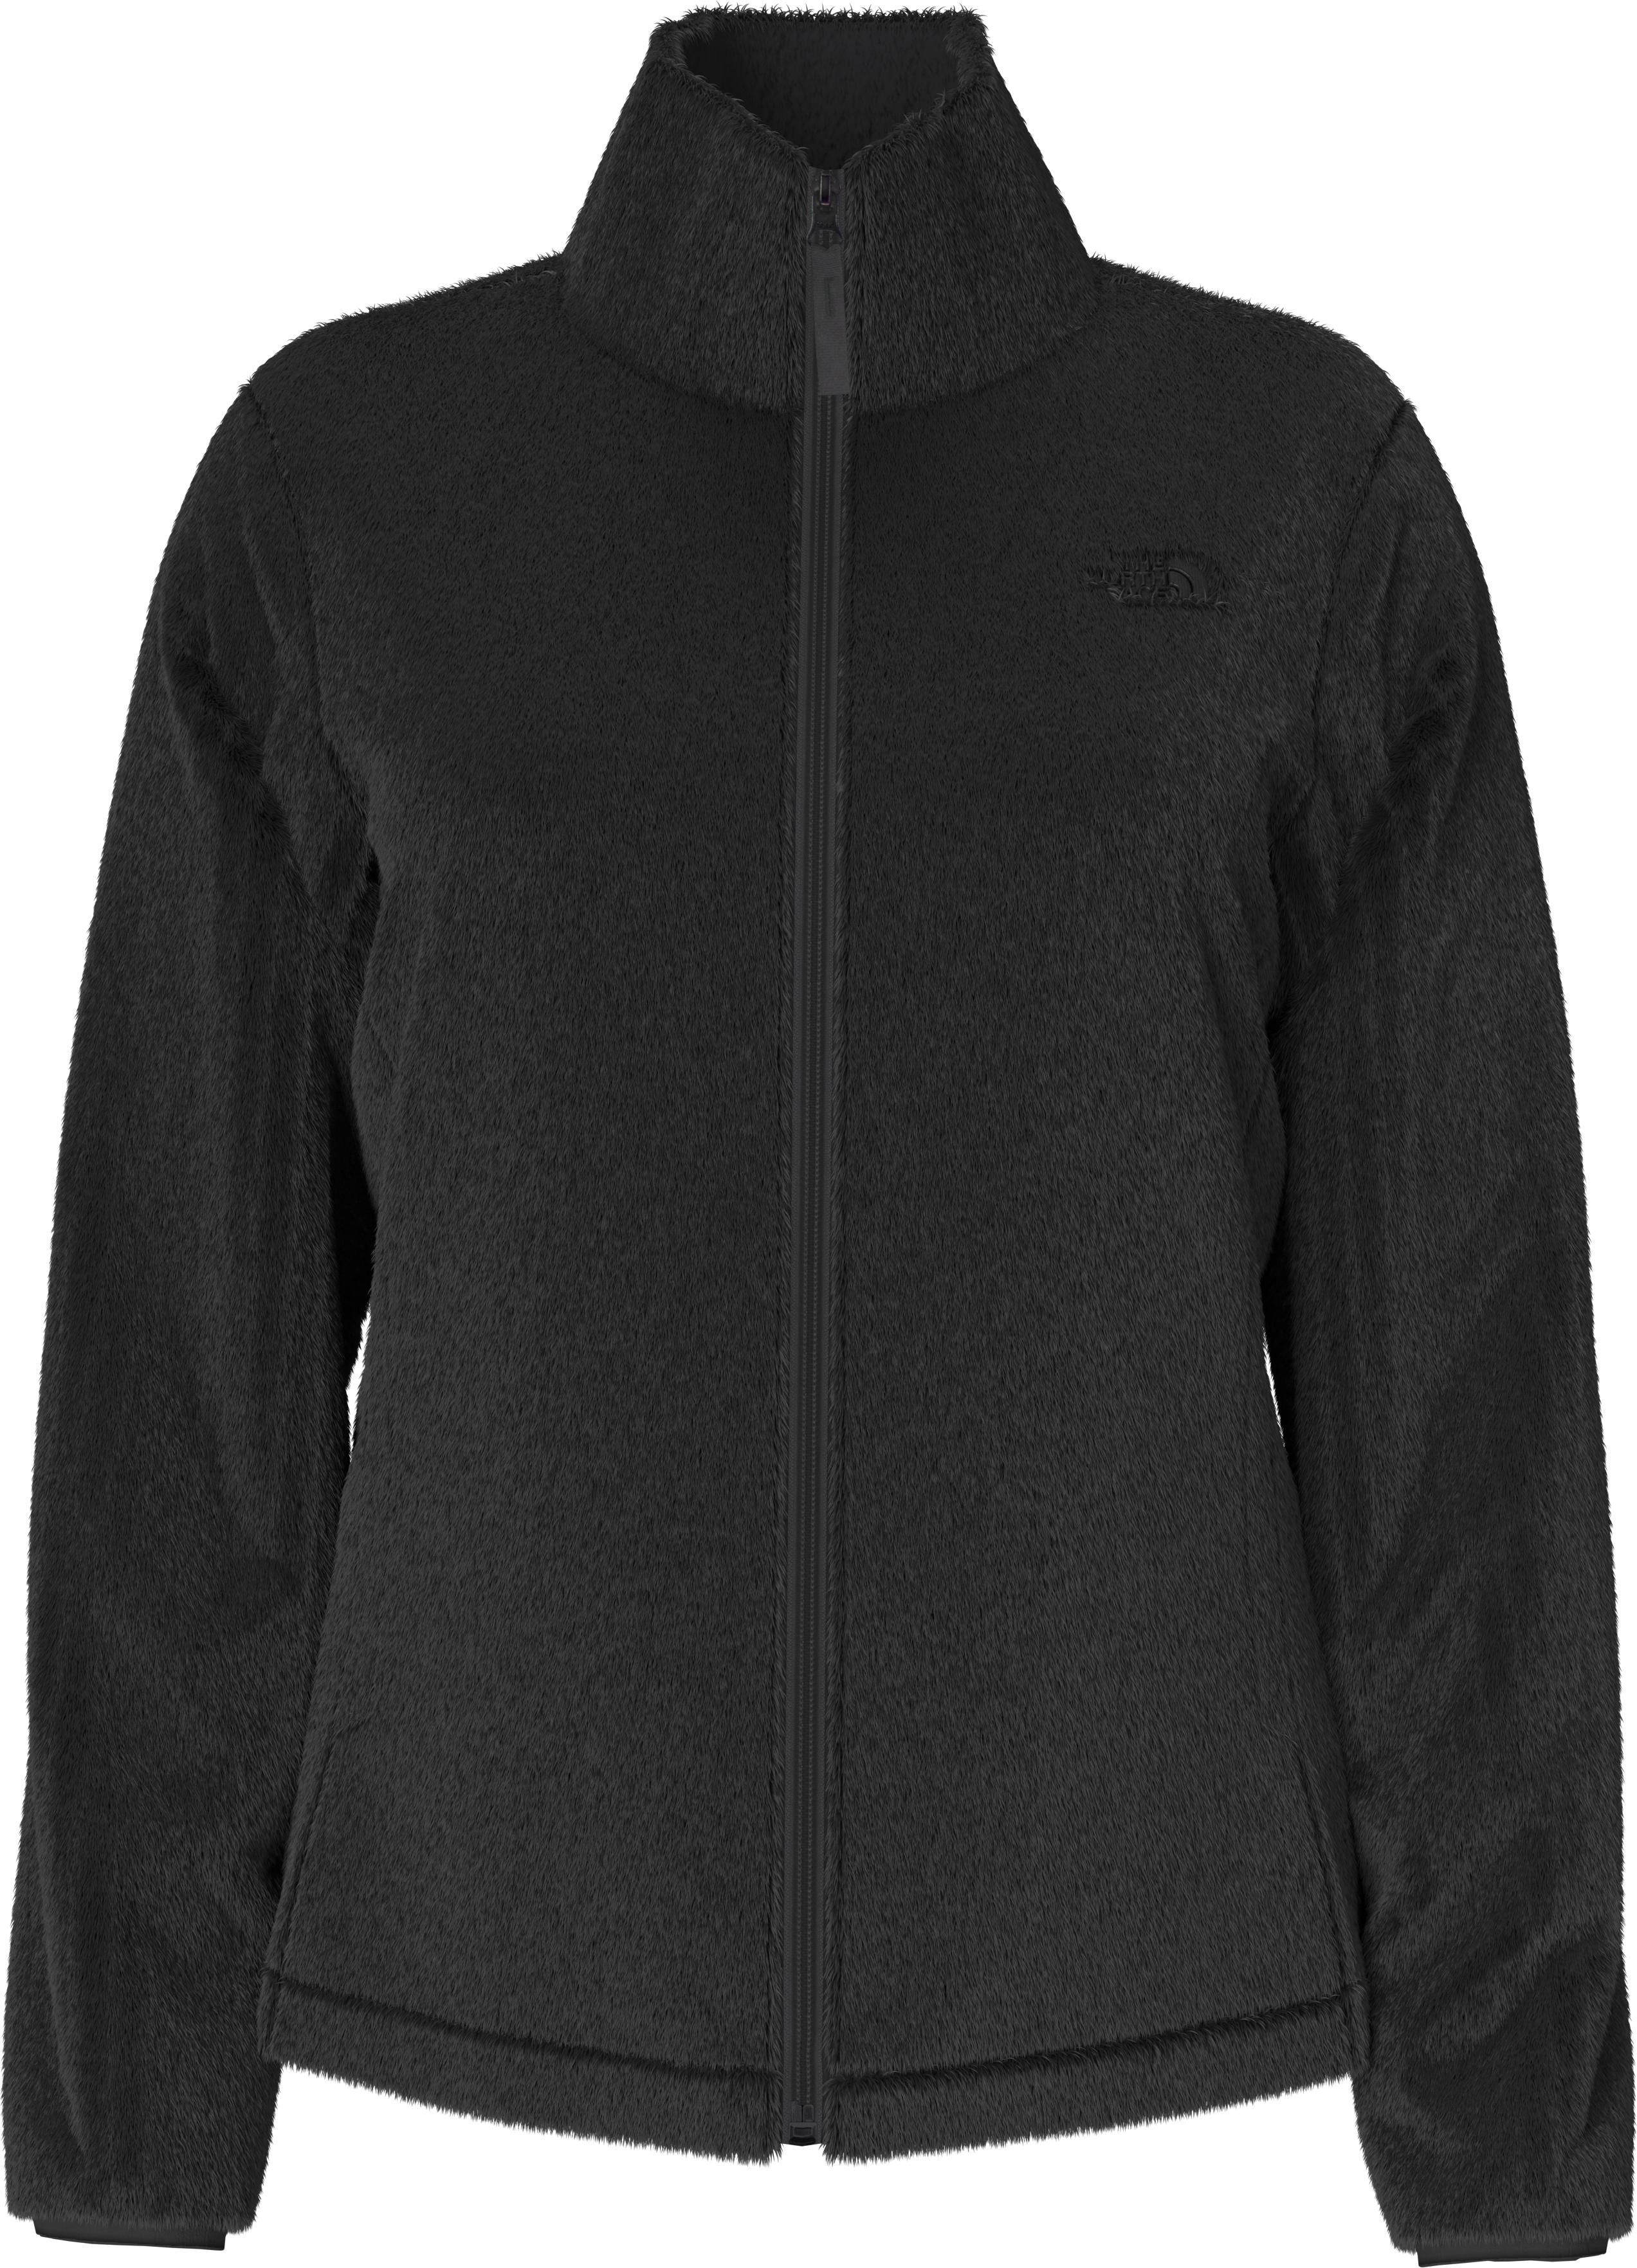 The North Face Osito high pile fleece zip up jacket in black